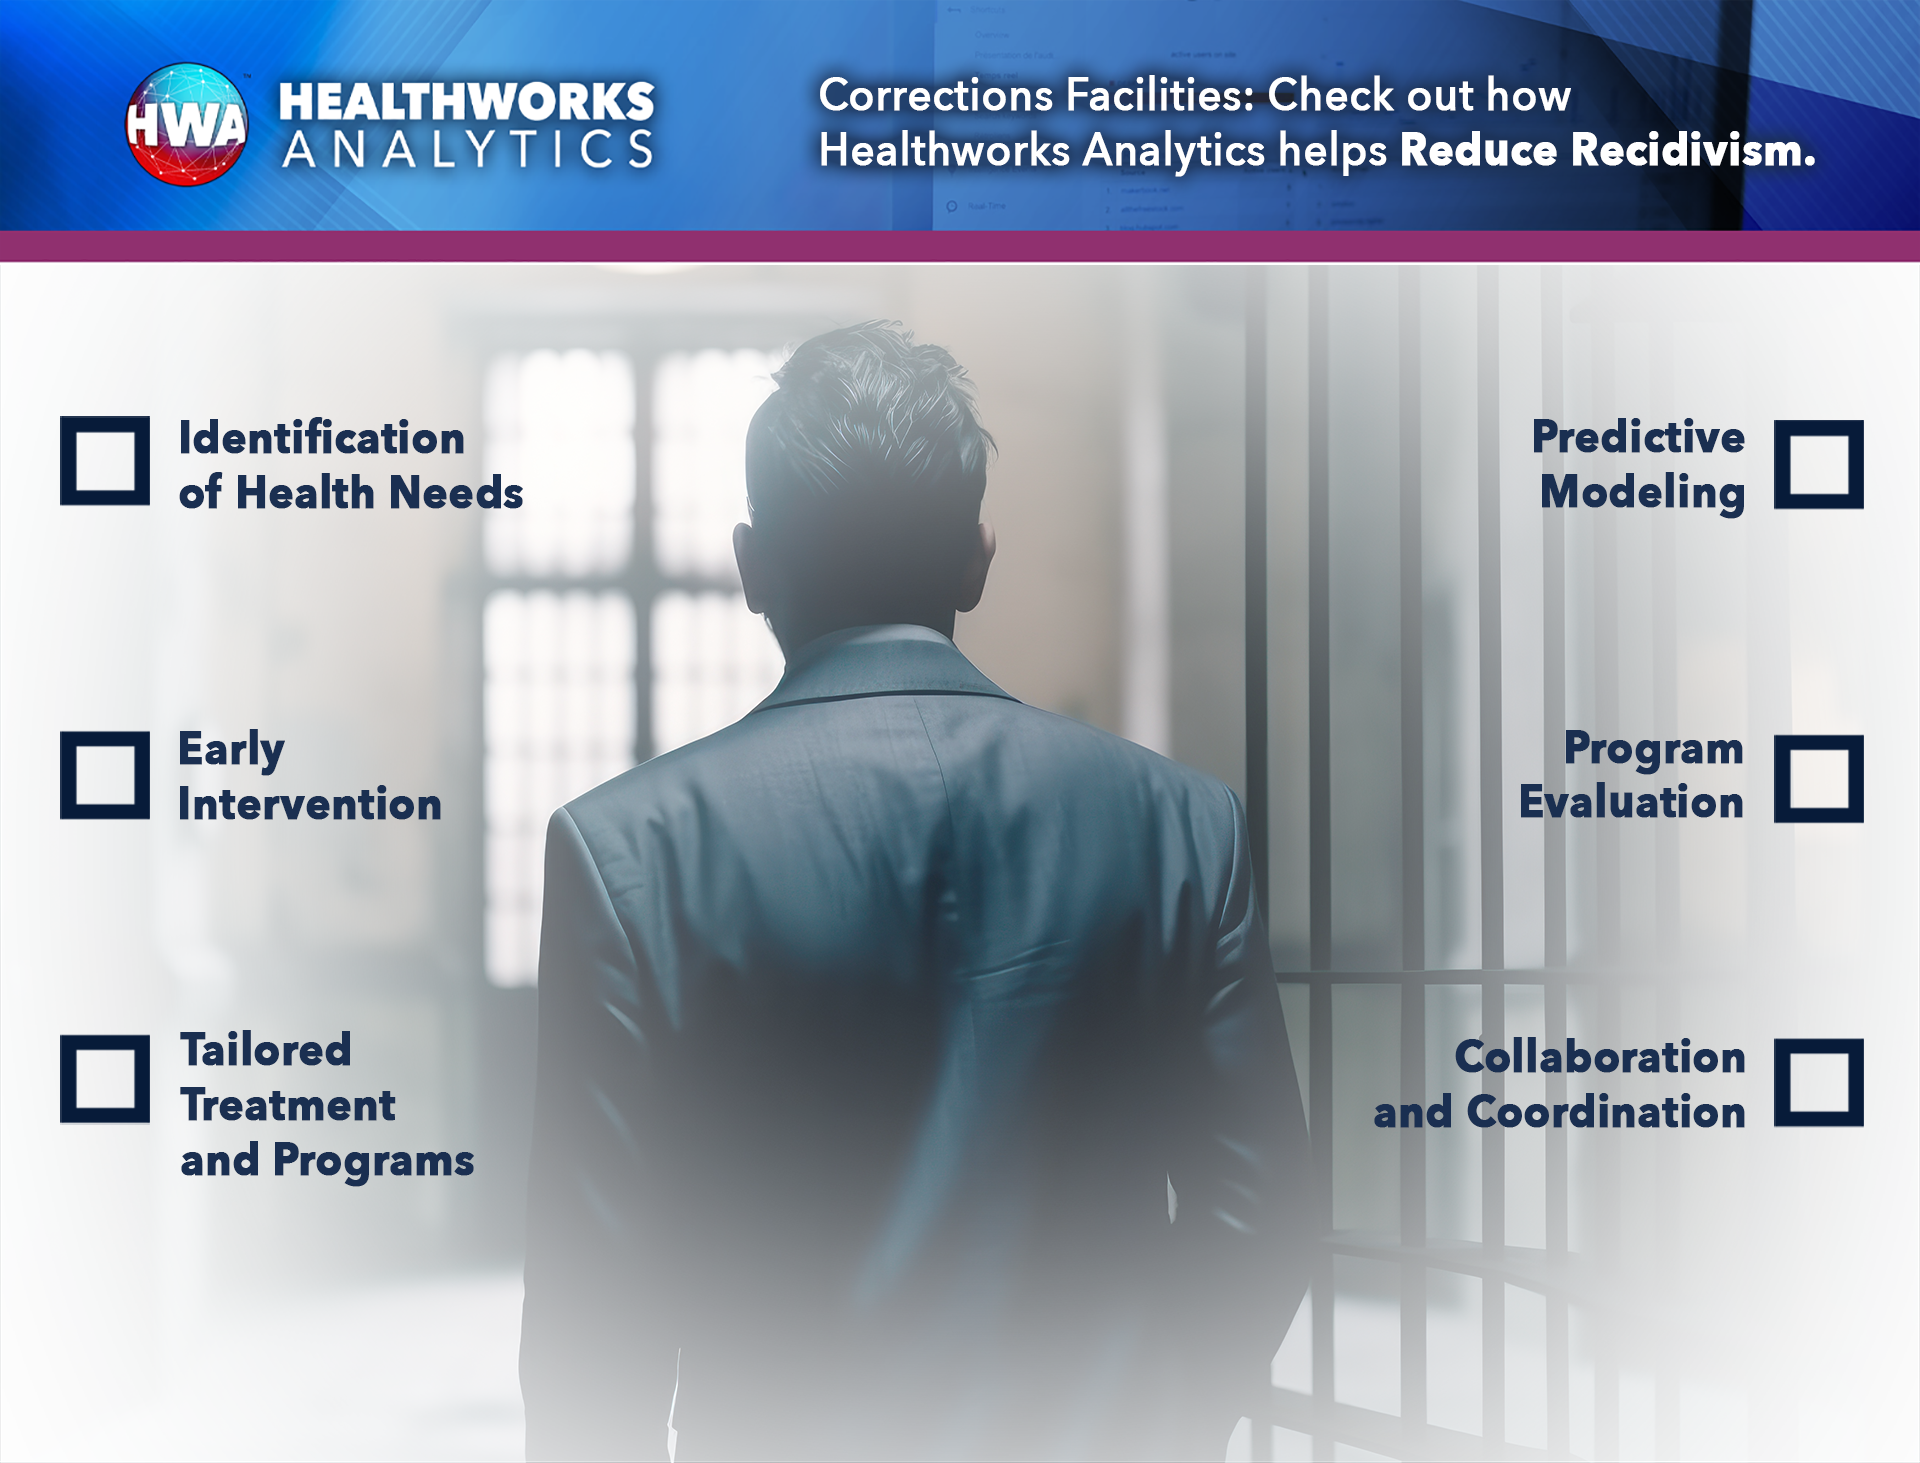 Corrections-Facilities---Check-out-how-Healthworks-Analytics-helps-Reduce-Recidivism-front